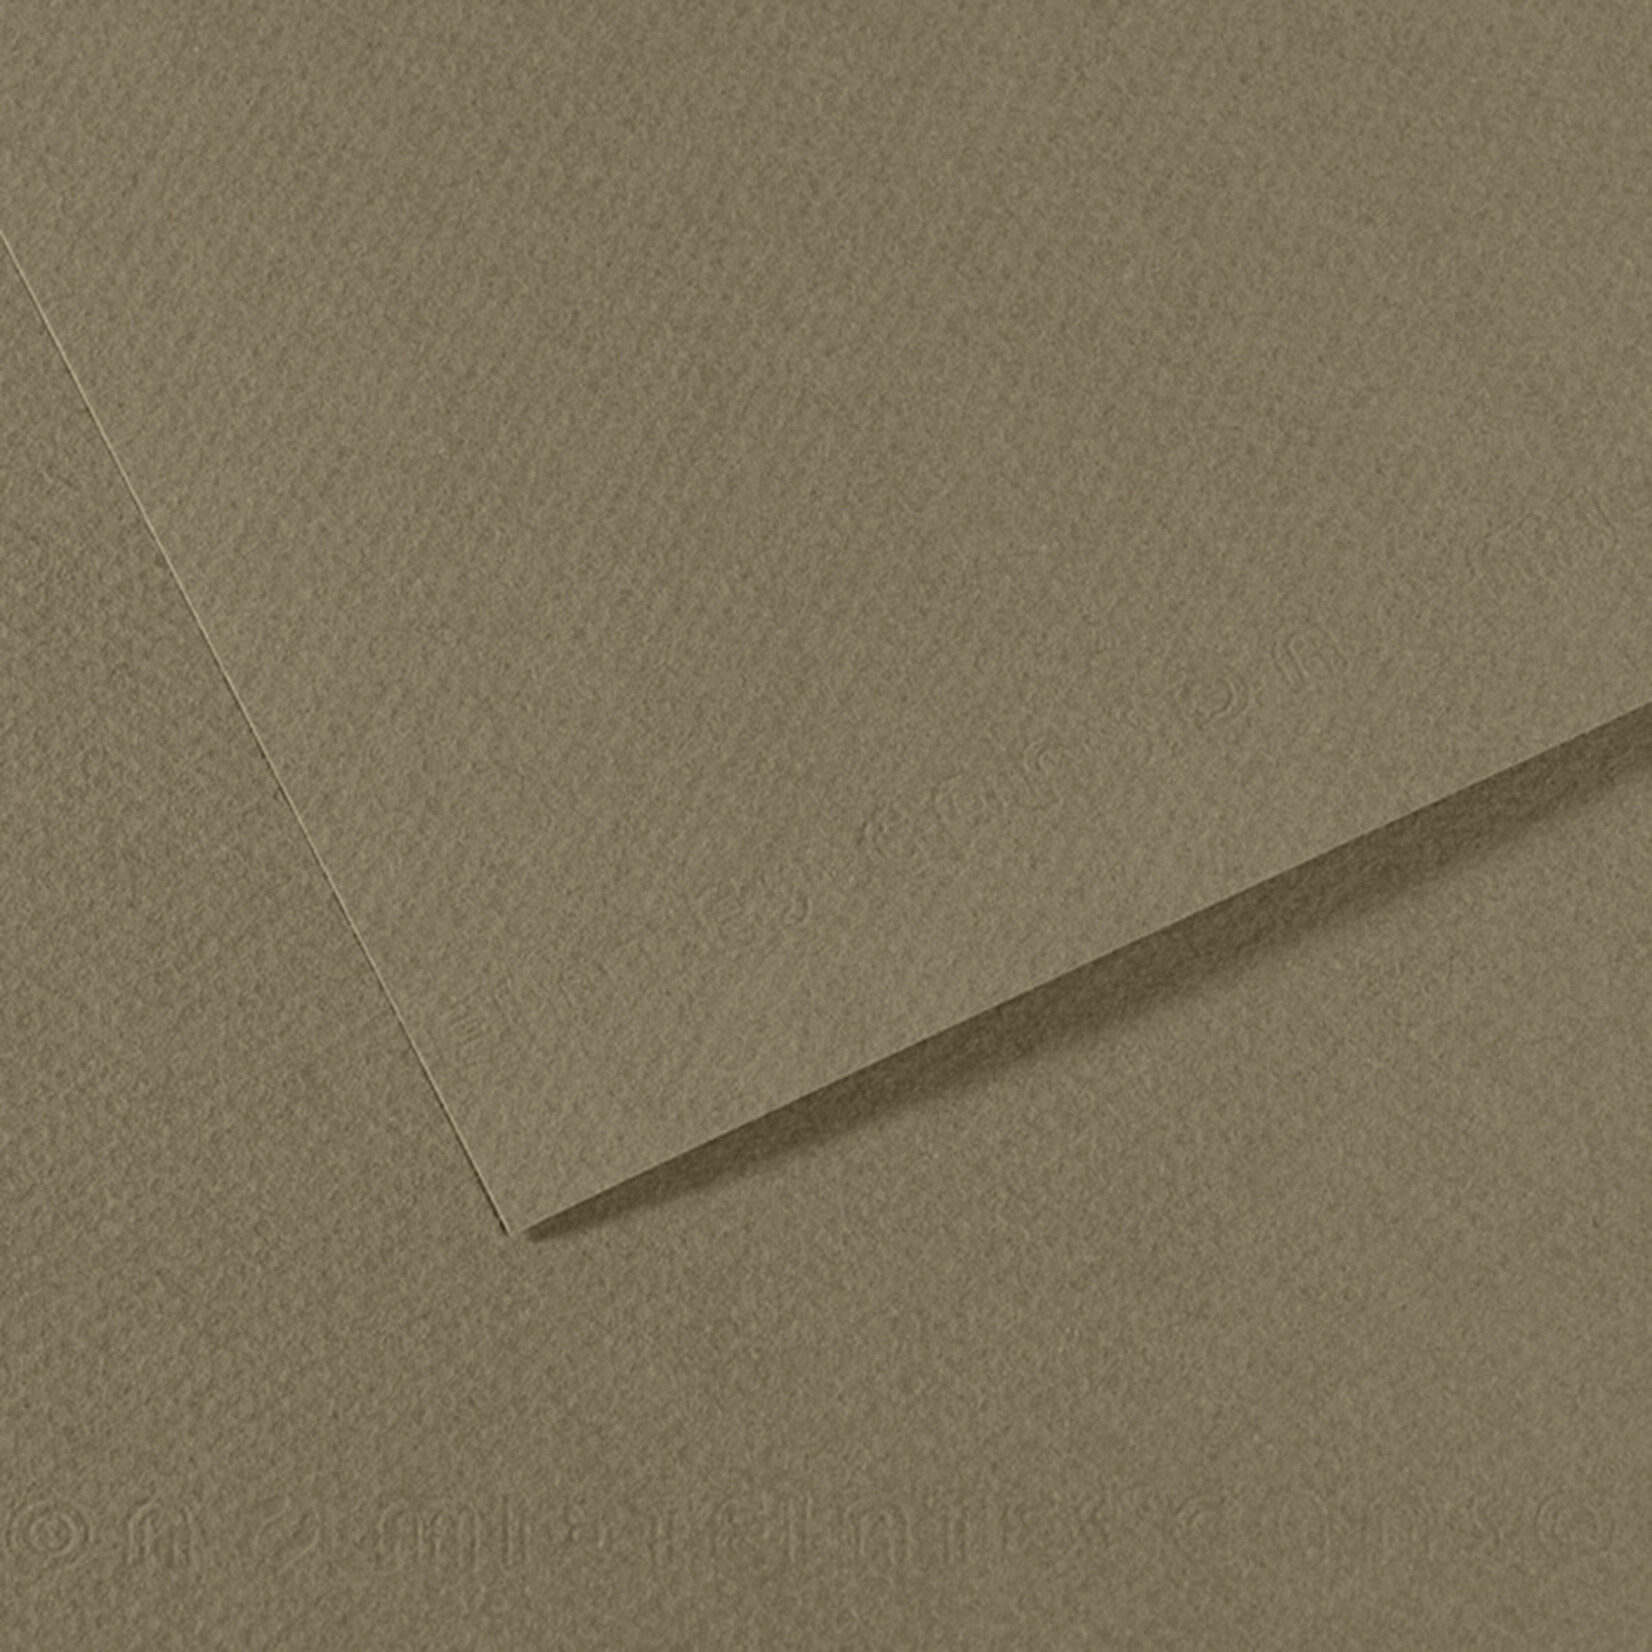 Canson Mi-Teintes Paper Sheets, 19'' x 25'', Sand